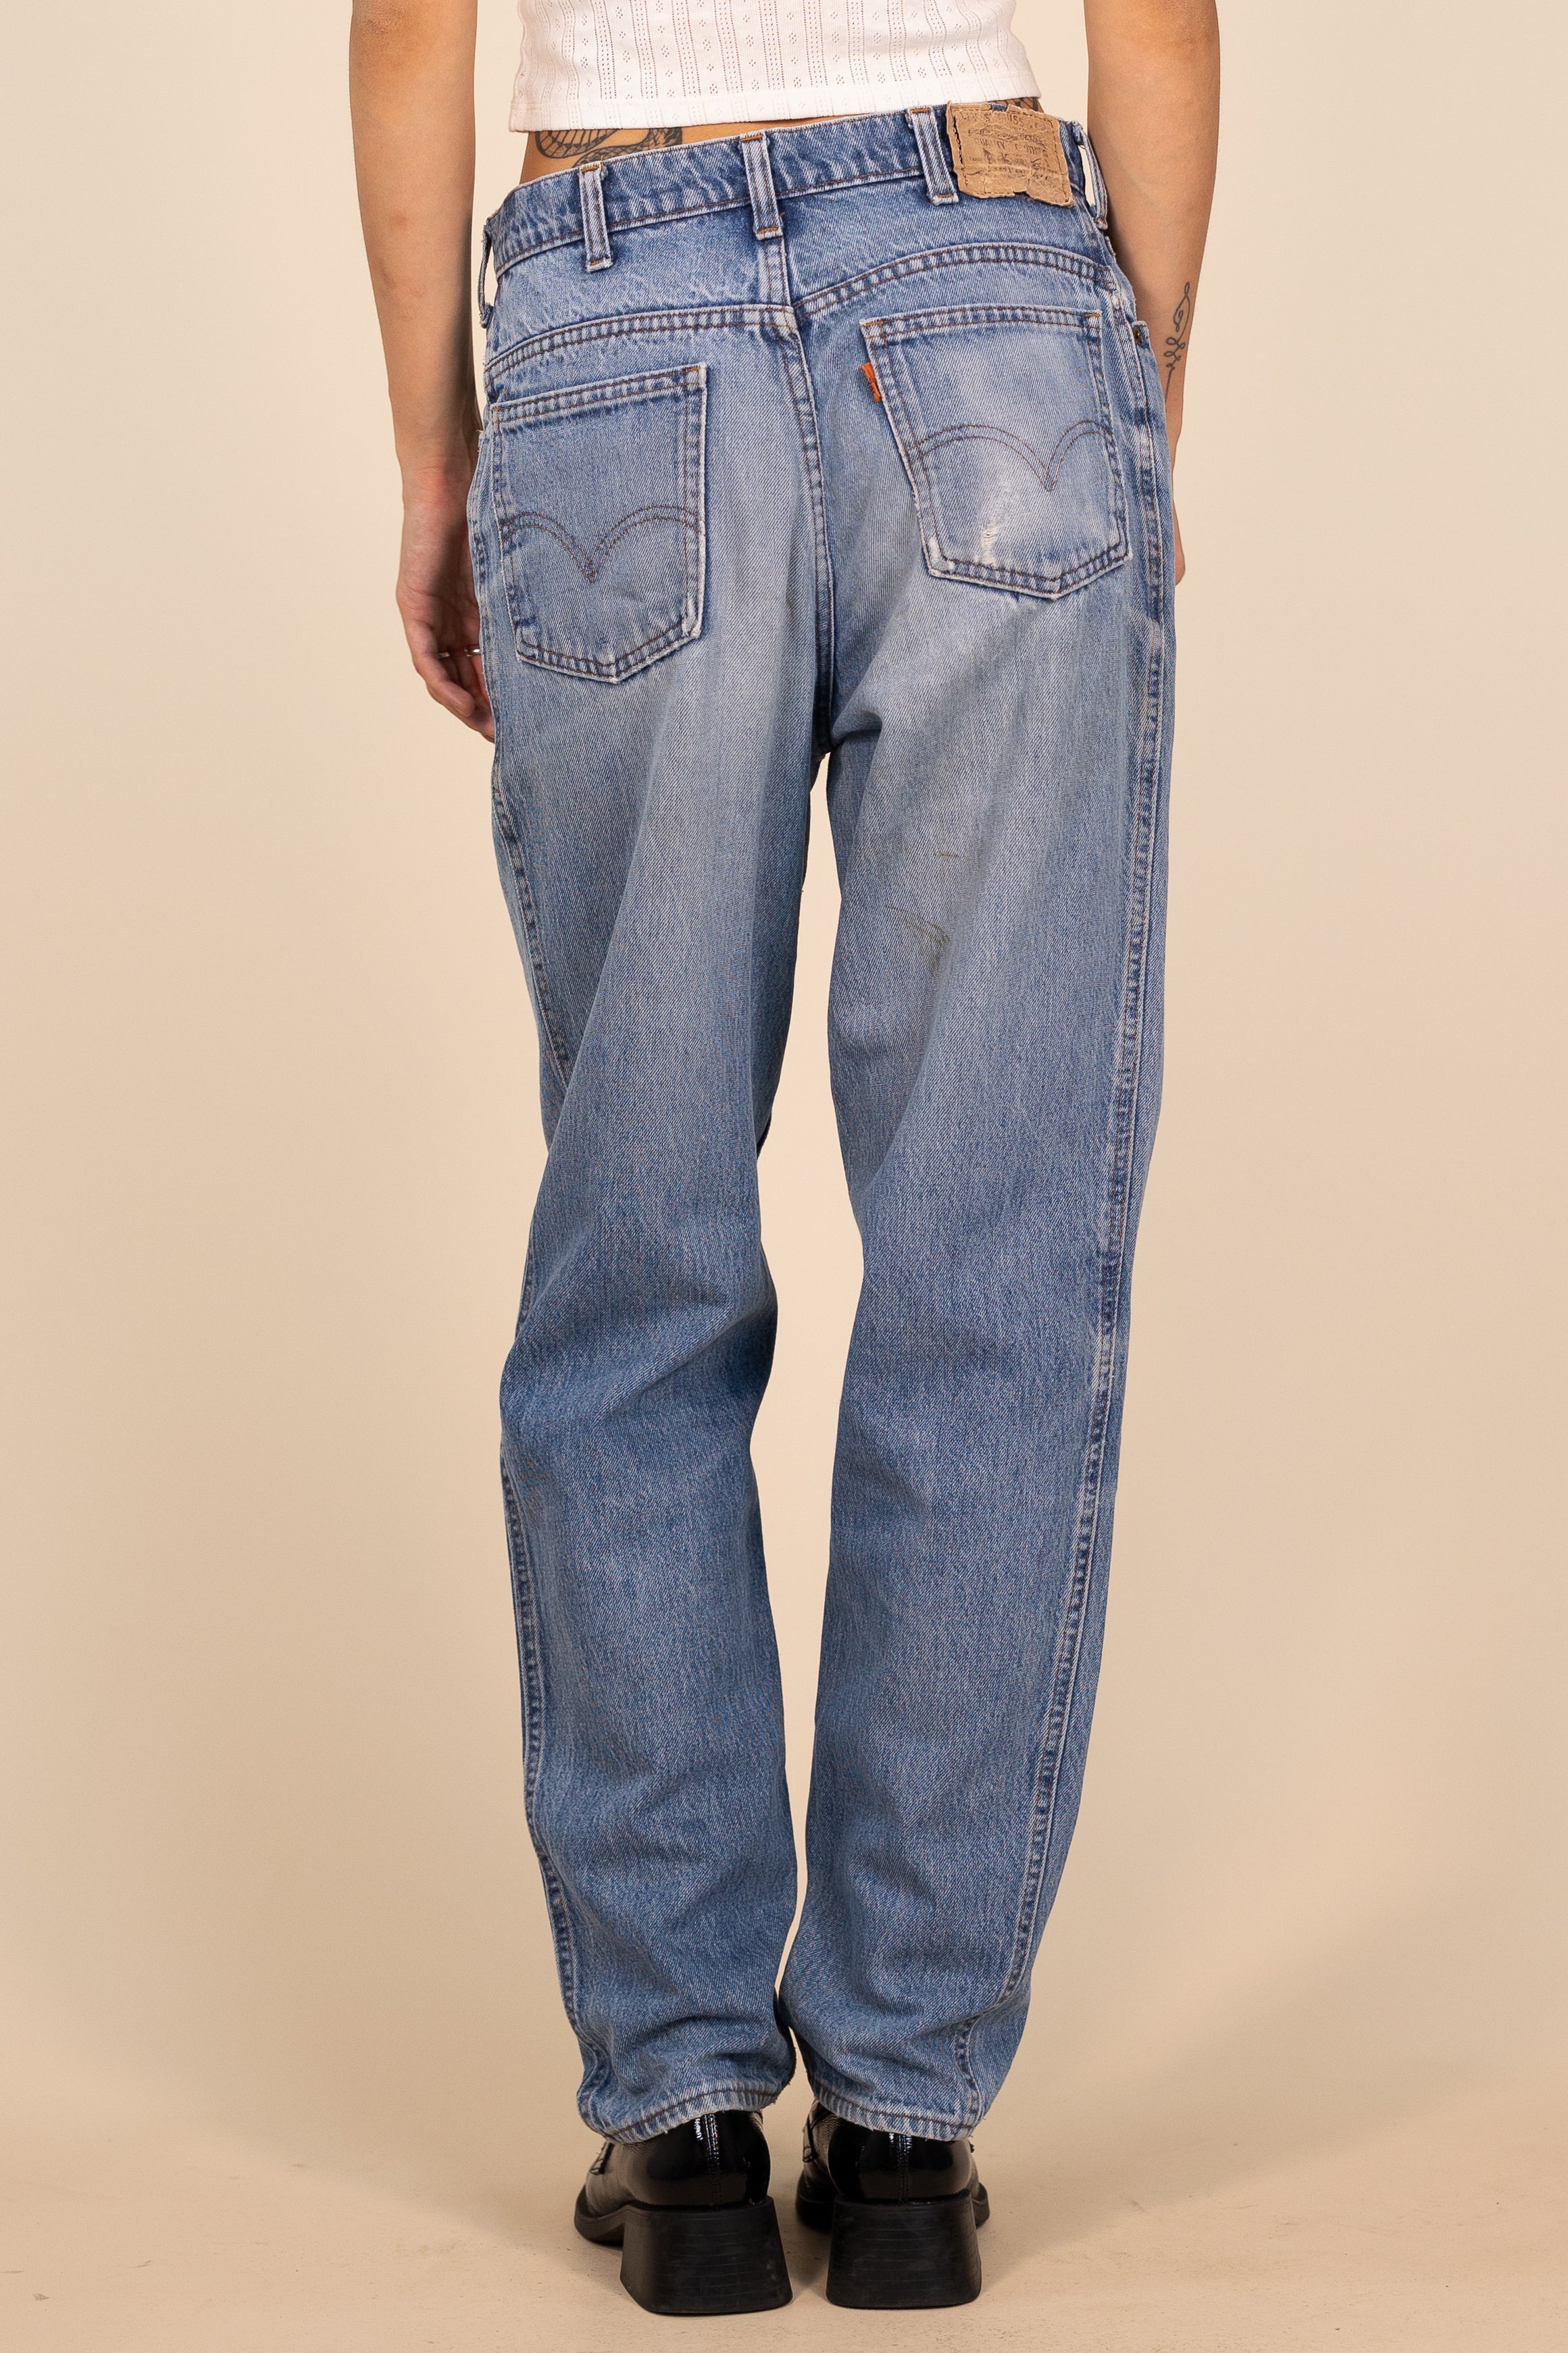 Jeans by Levi's with Orange Tab